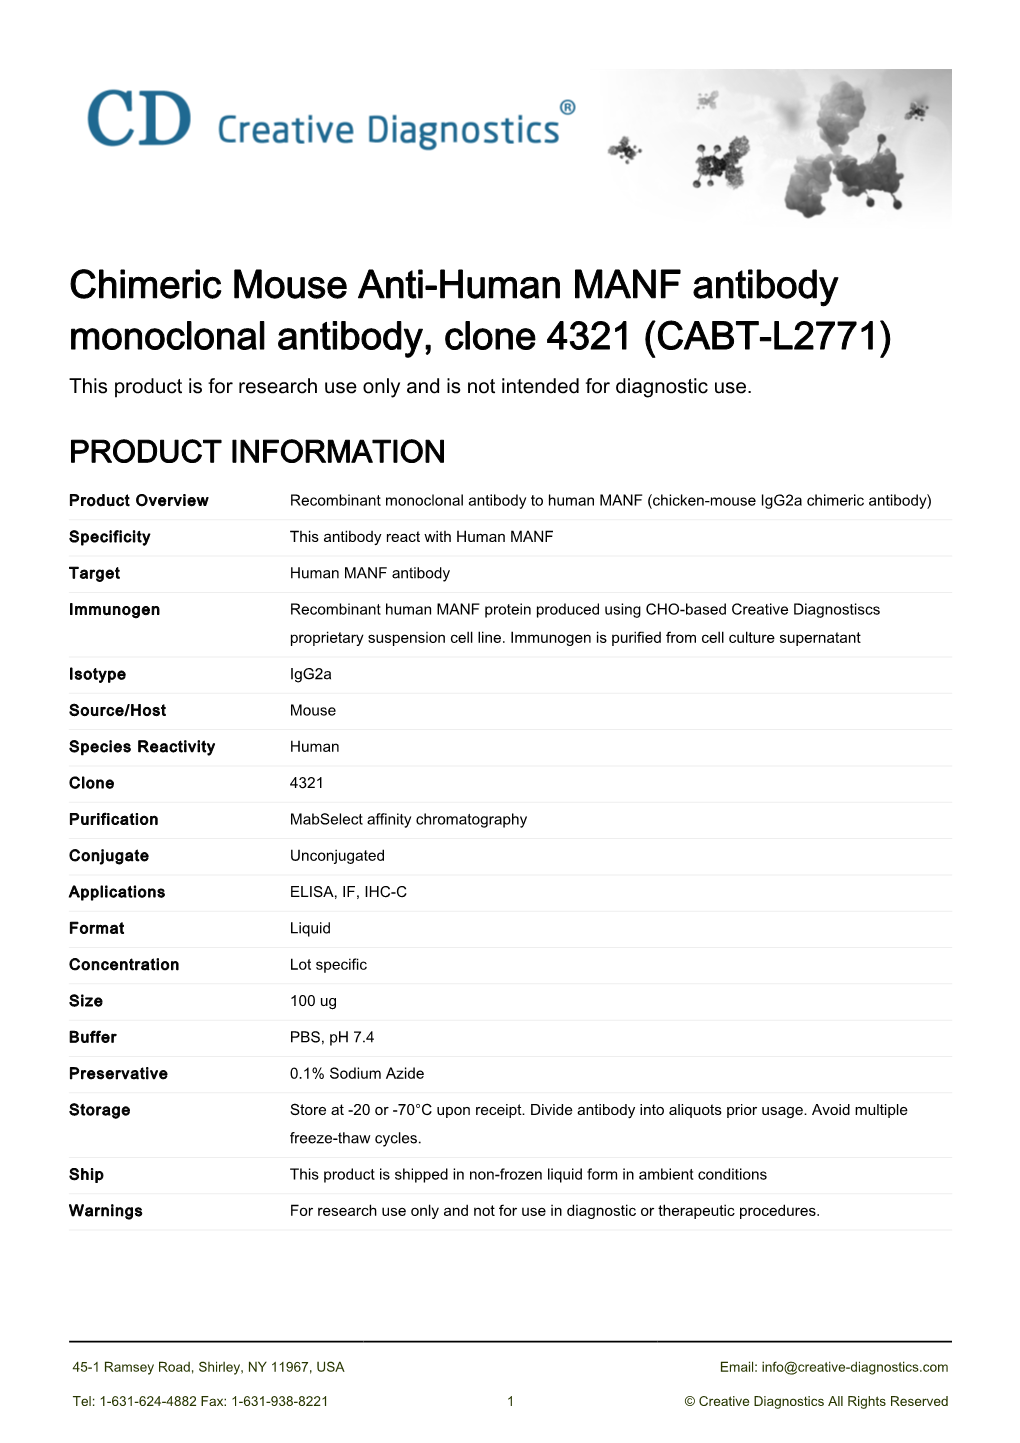 Chimeric Mouse Anti-Human MANF Antibody Monoclonal Antibody, Clone 4321 (CABT-L2771) This Product Is for Research Use Only and Is Not Intended for Diagnostic Use